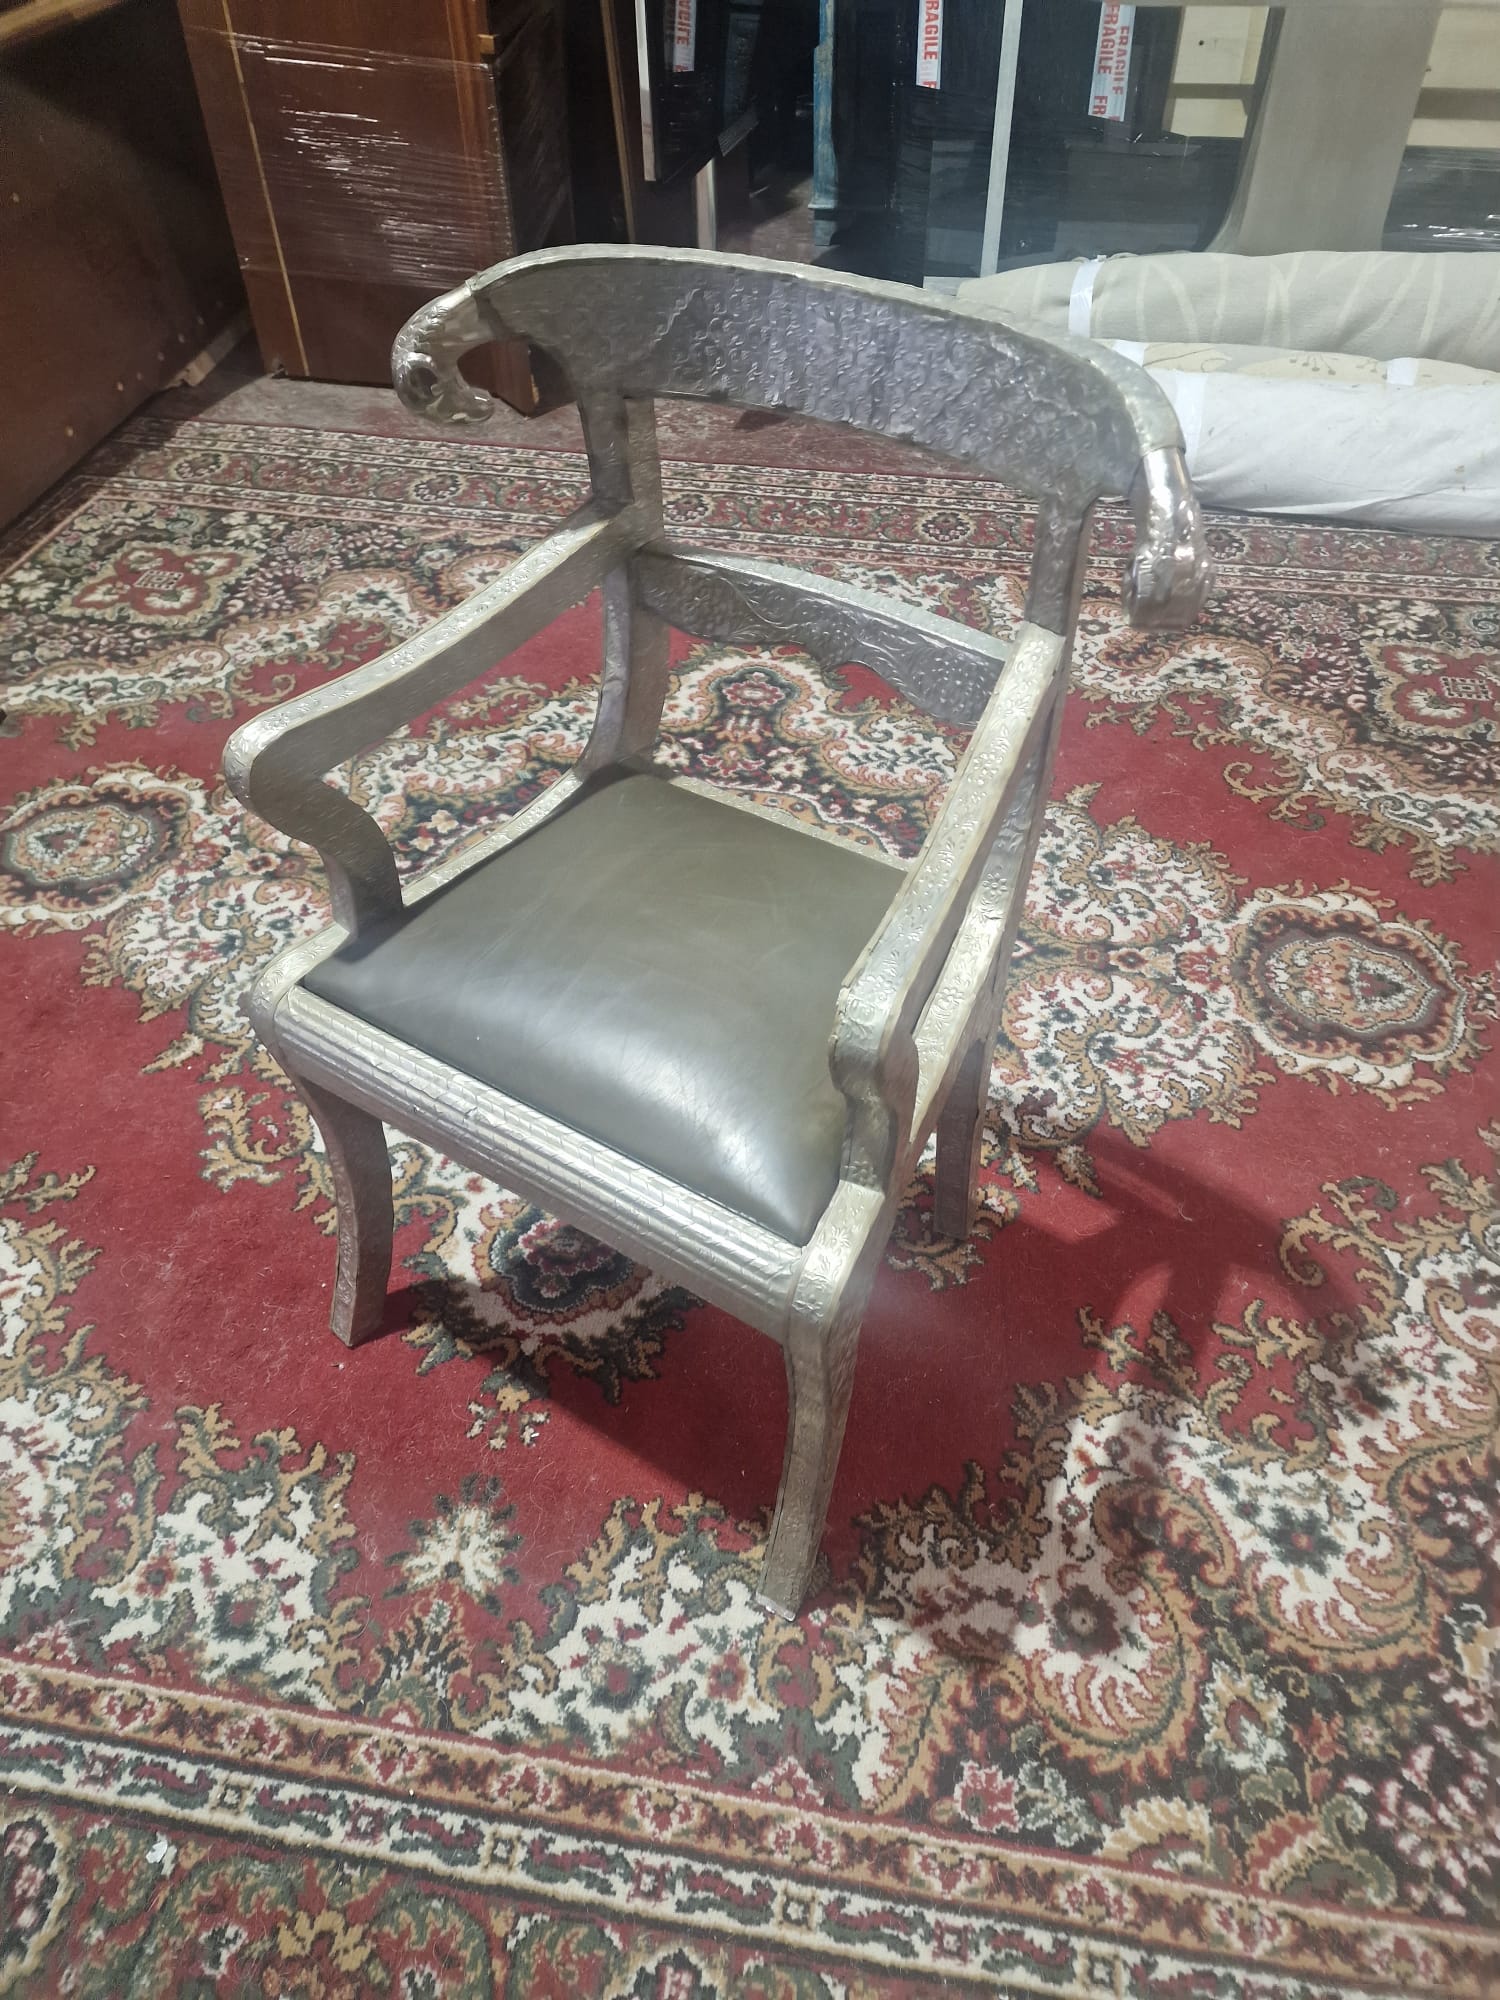 Dowry Chair And Footstool A Striking Vintage Anglo-Indian Silvered Metal-Clad Chair, 20th Century, - Image 10 of 16